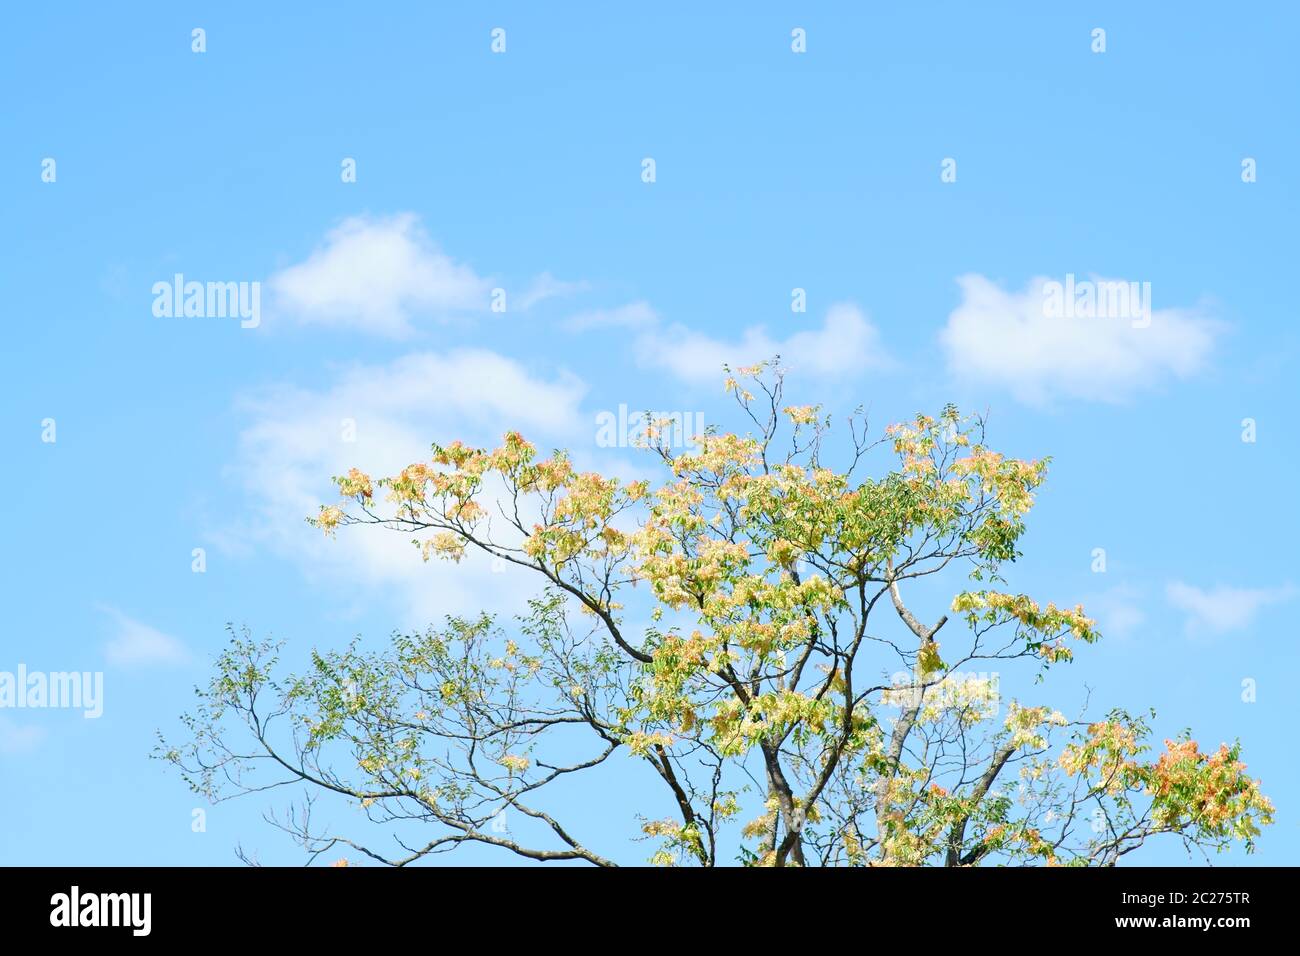 The crown and the treetop of a staghorn sumac tree in front of a blue sky. Stock Photo